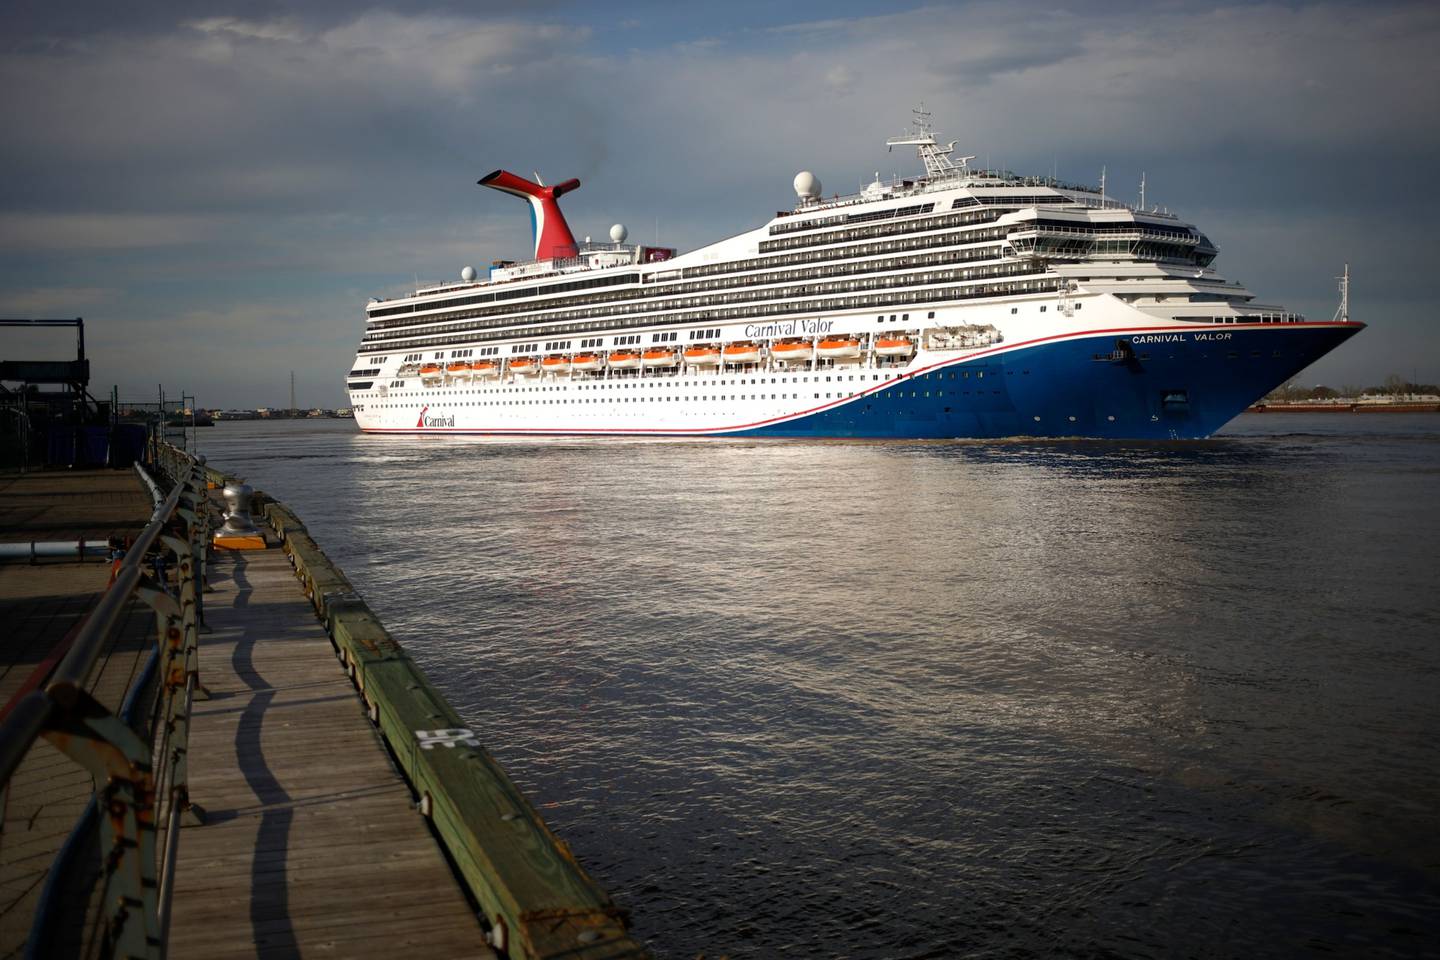 The Carnival Valor cruise ship sets sail from the Port of New Orleans in New Orleans, Louisiana.